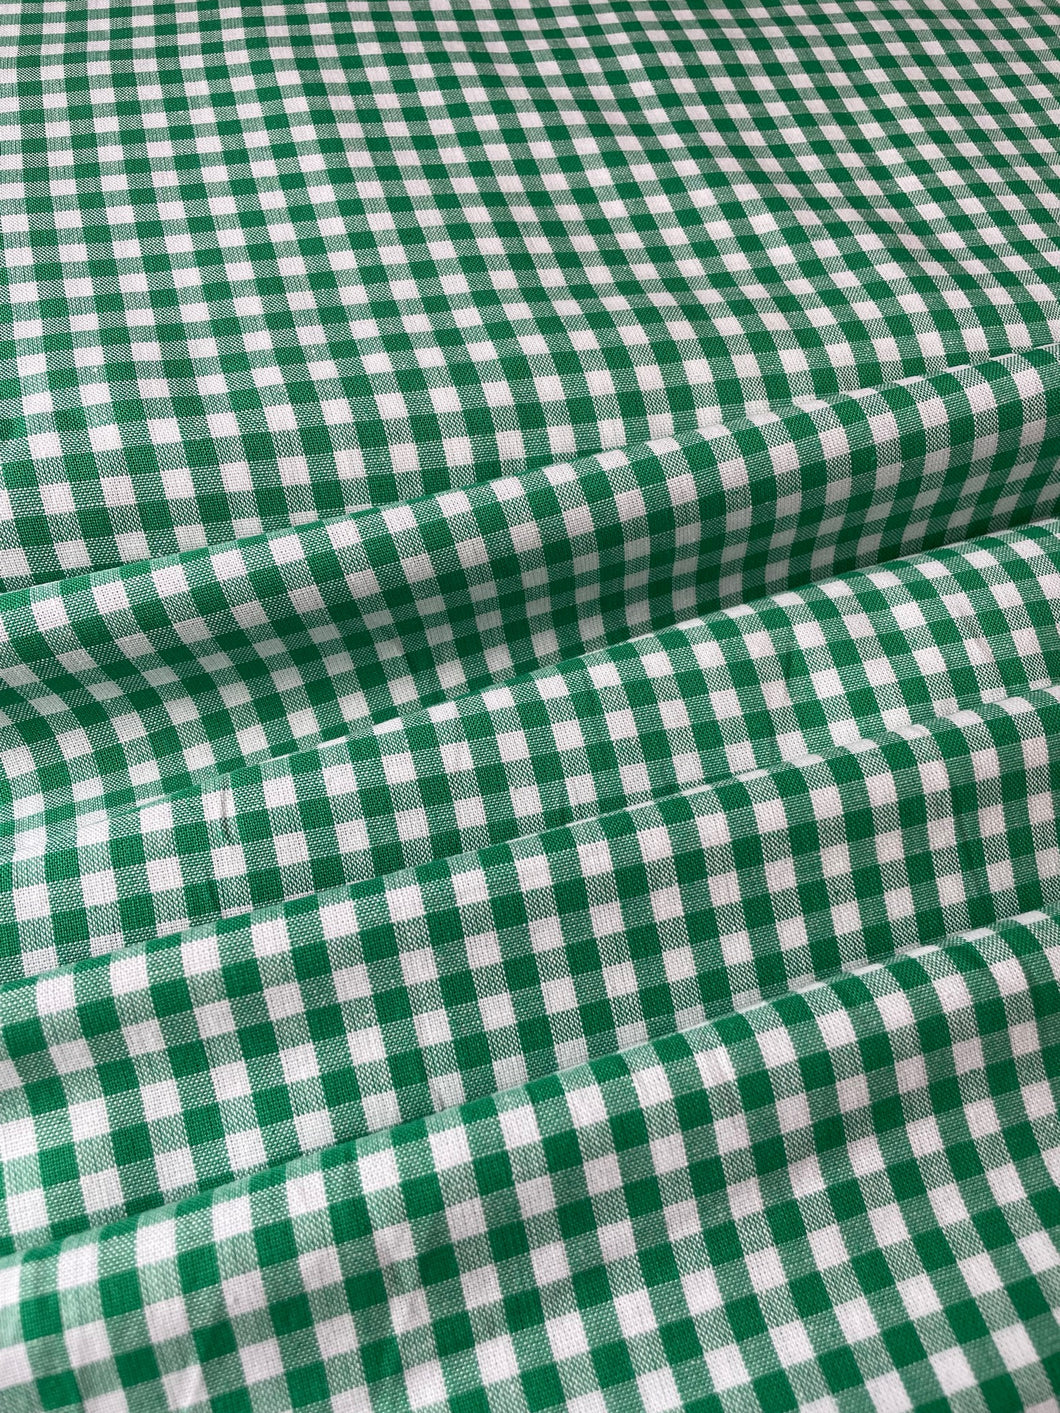 Emerald green and white gingham